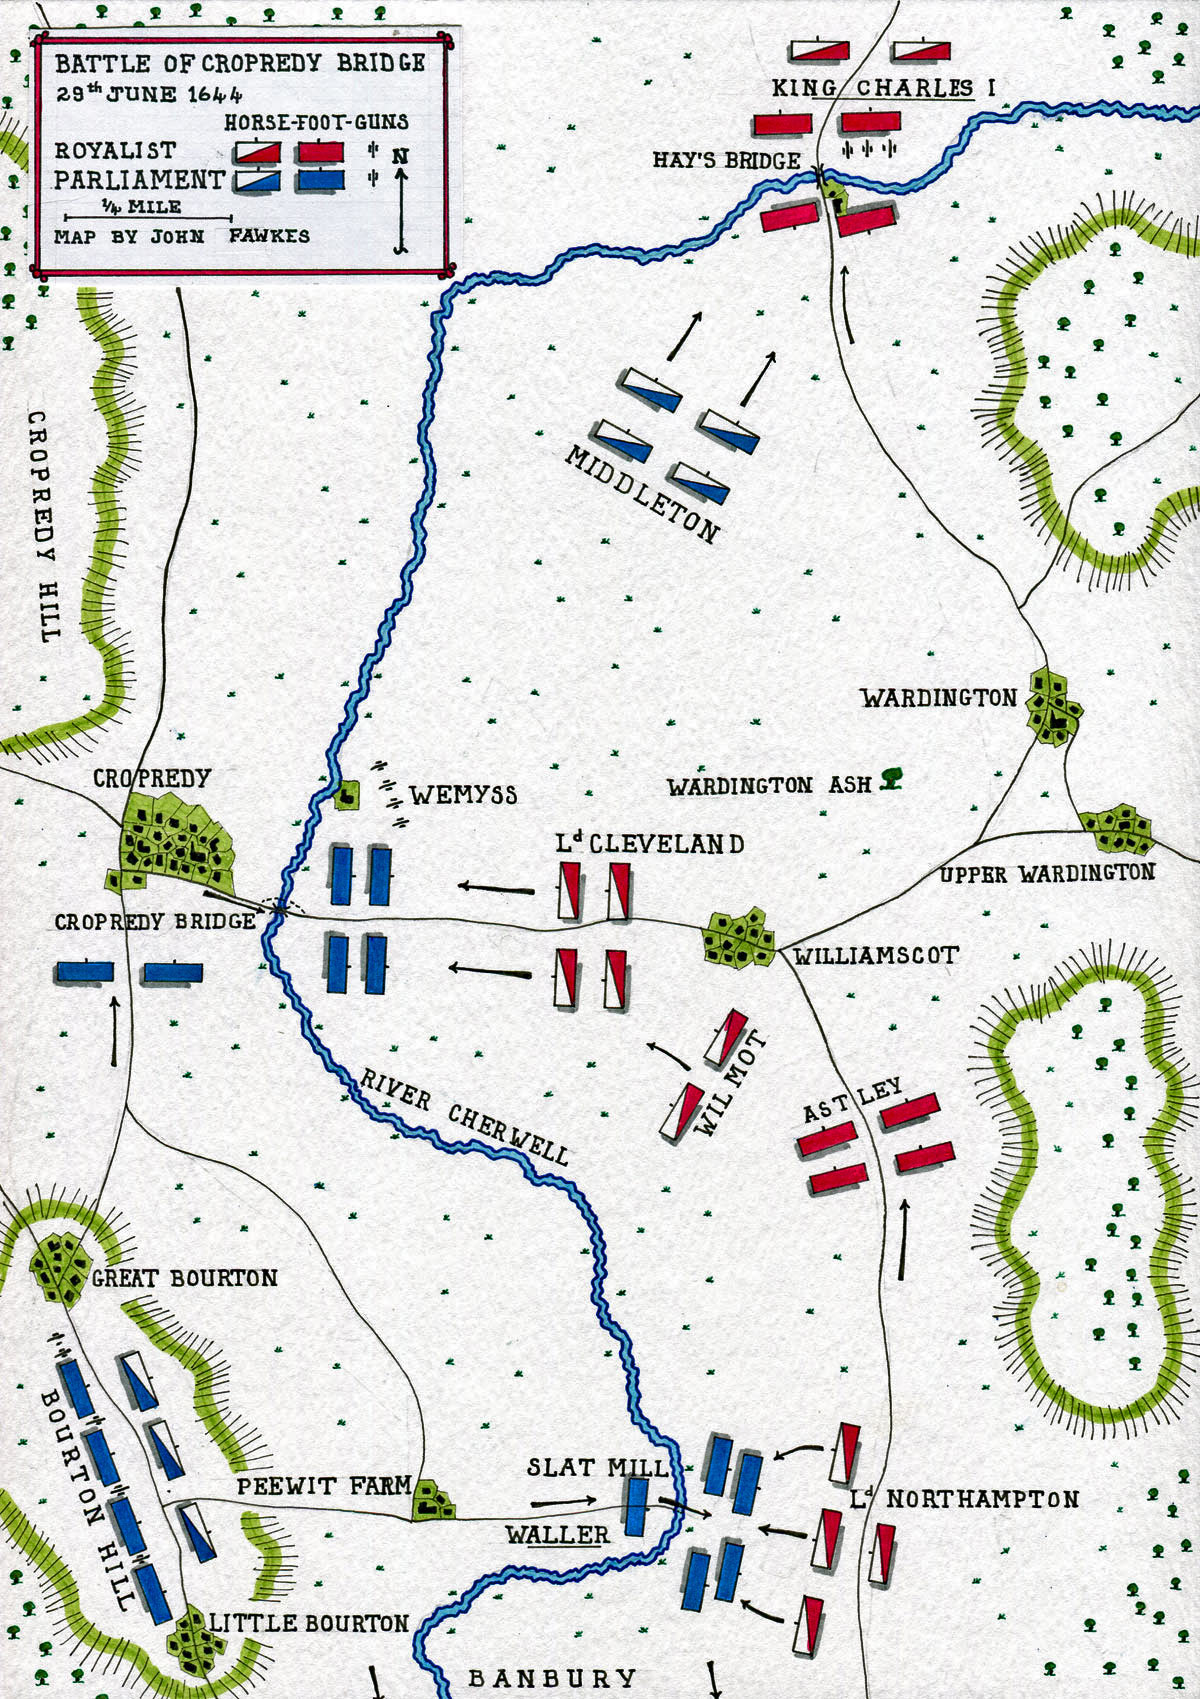 Map of the Battle of Cropredy Bridge on 29th June 1644 in the English Civil War: map by John Fawkes